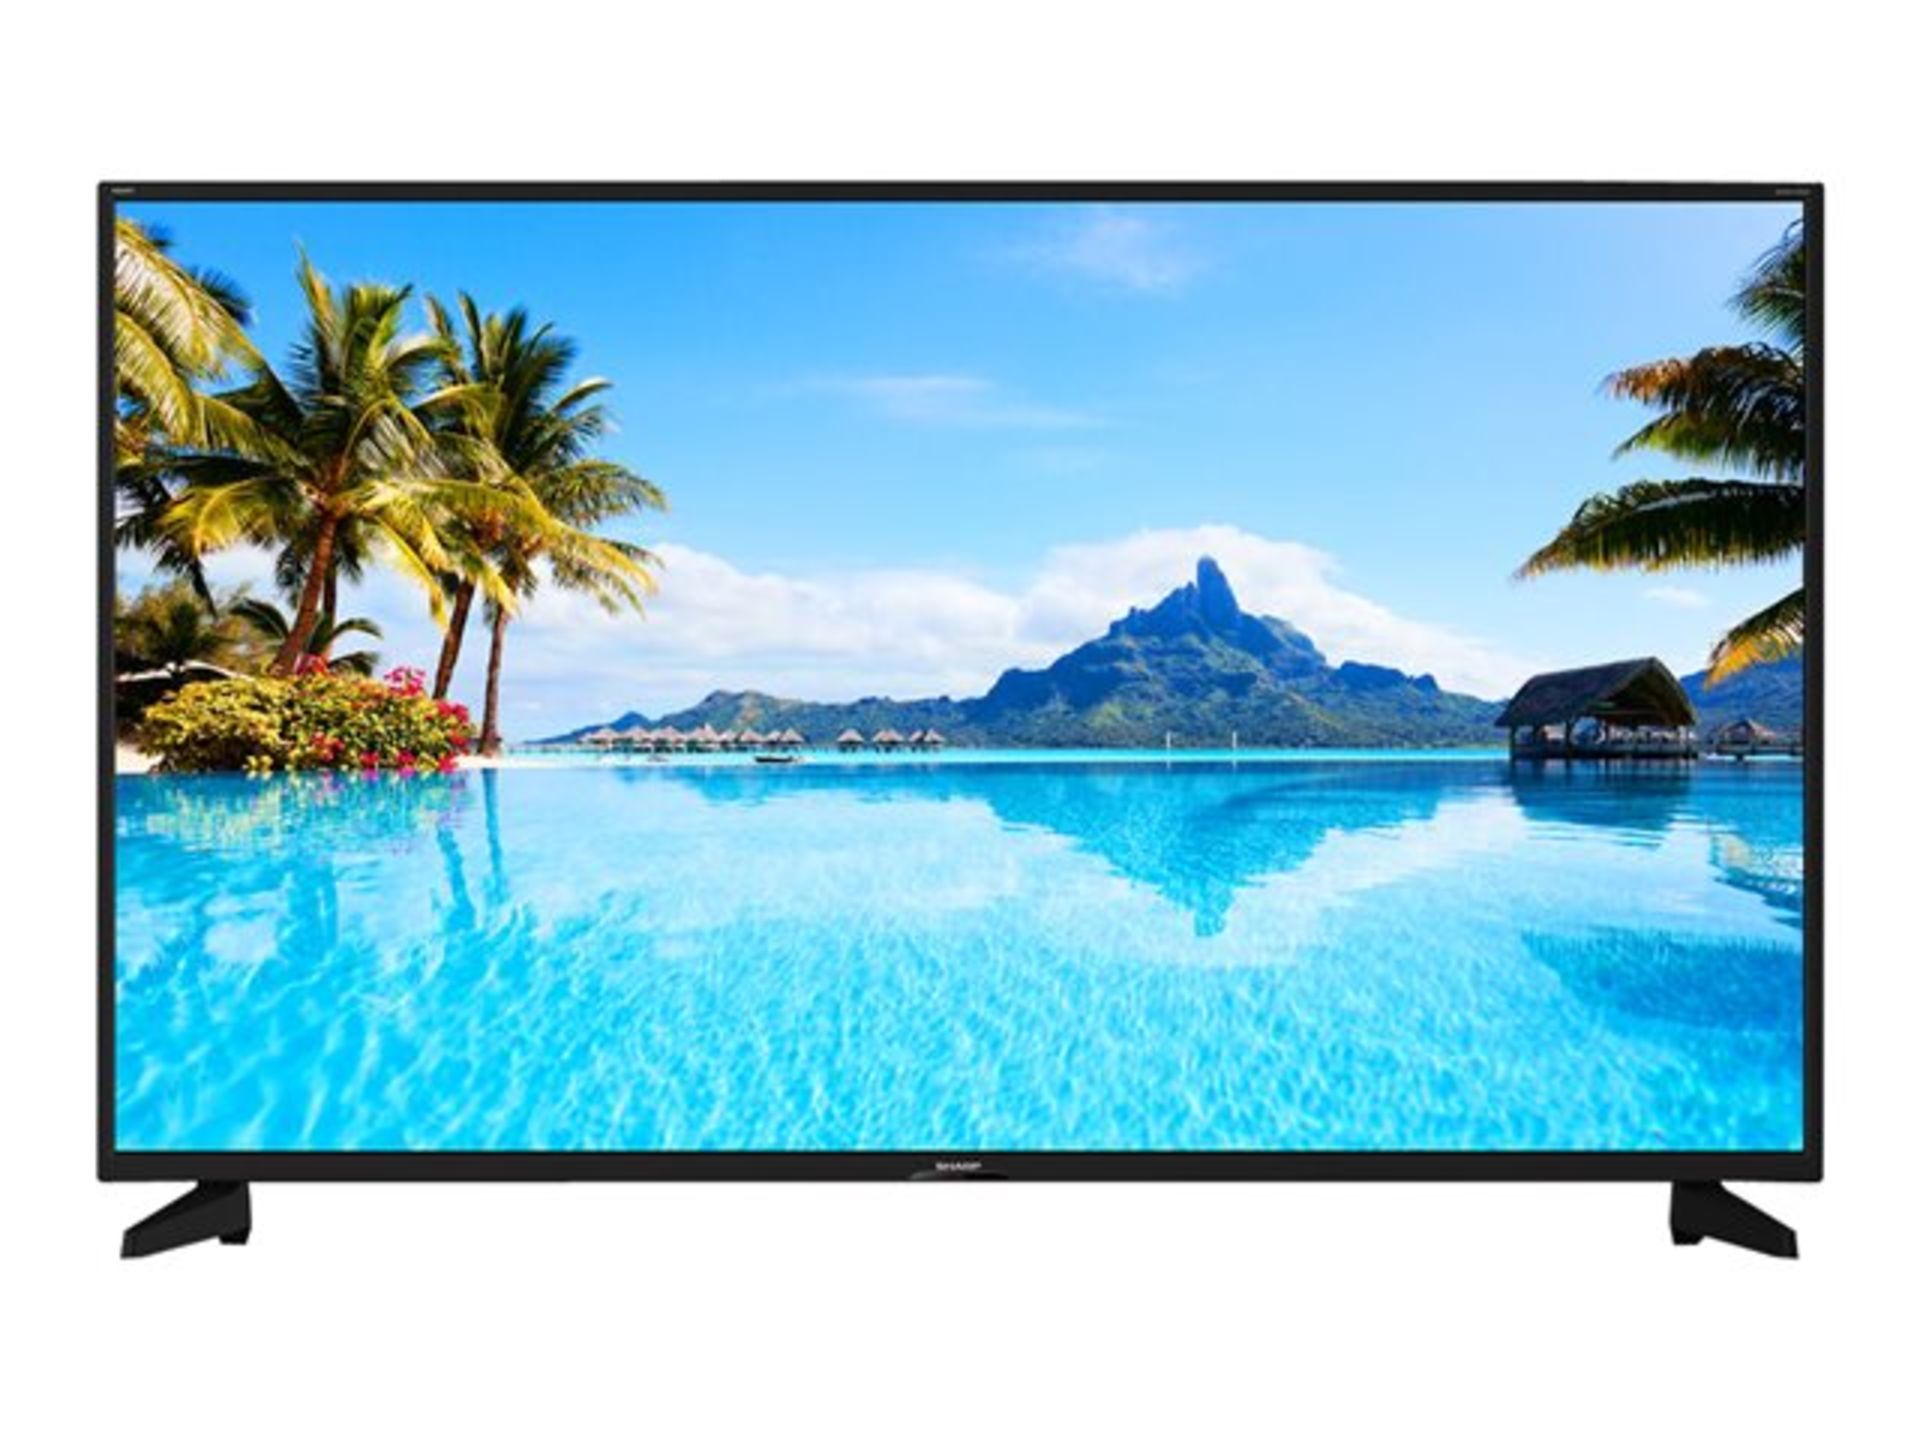 1 TOSHIBA 50UA2B63DB 50" SMART 4K ULTRA HD HDR LED TV WITH REMOTE RRP Â£299 (WORKING, NO STAND)